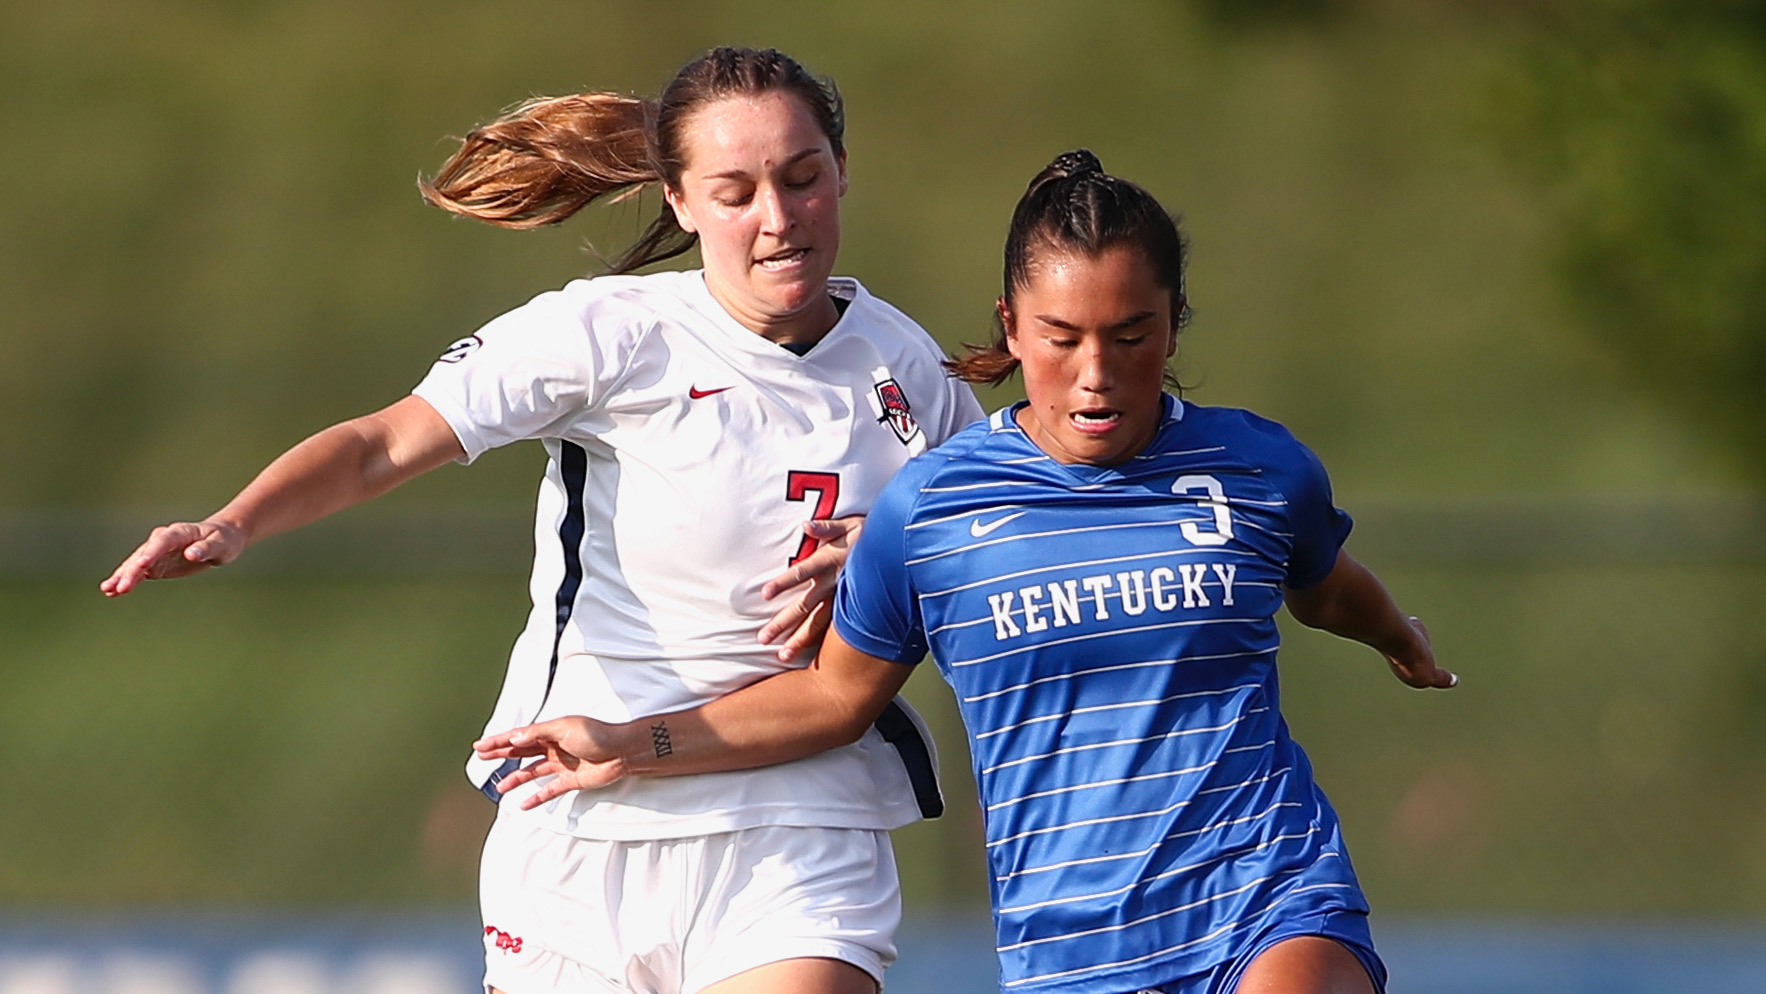 Kentucky Clipped by No. 15 Ole Miss, 2-1, in SEC Opener